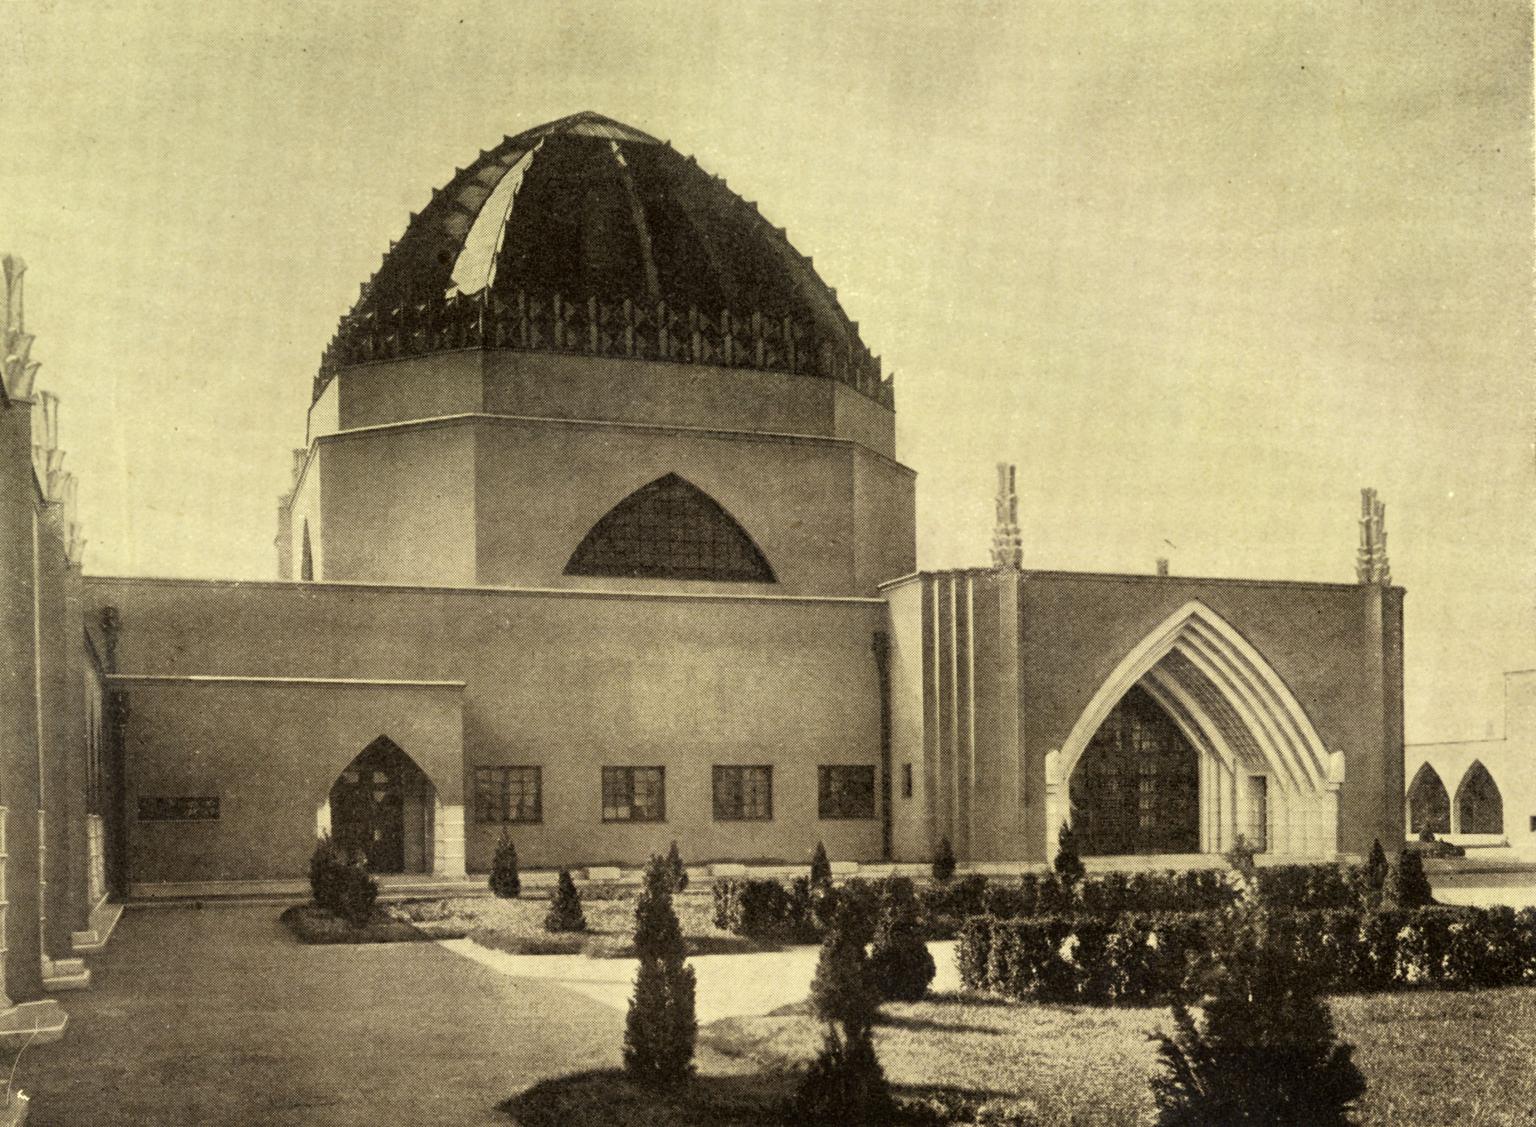 Photograph of building with dome roof.